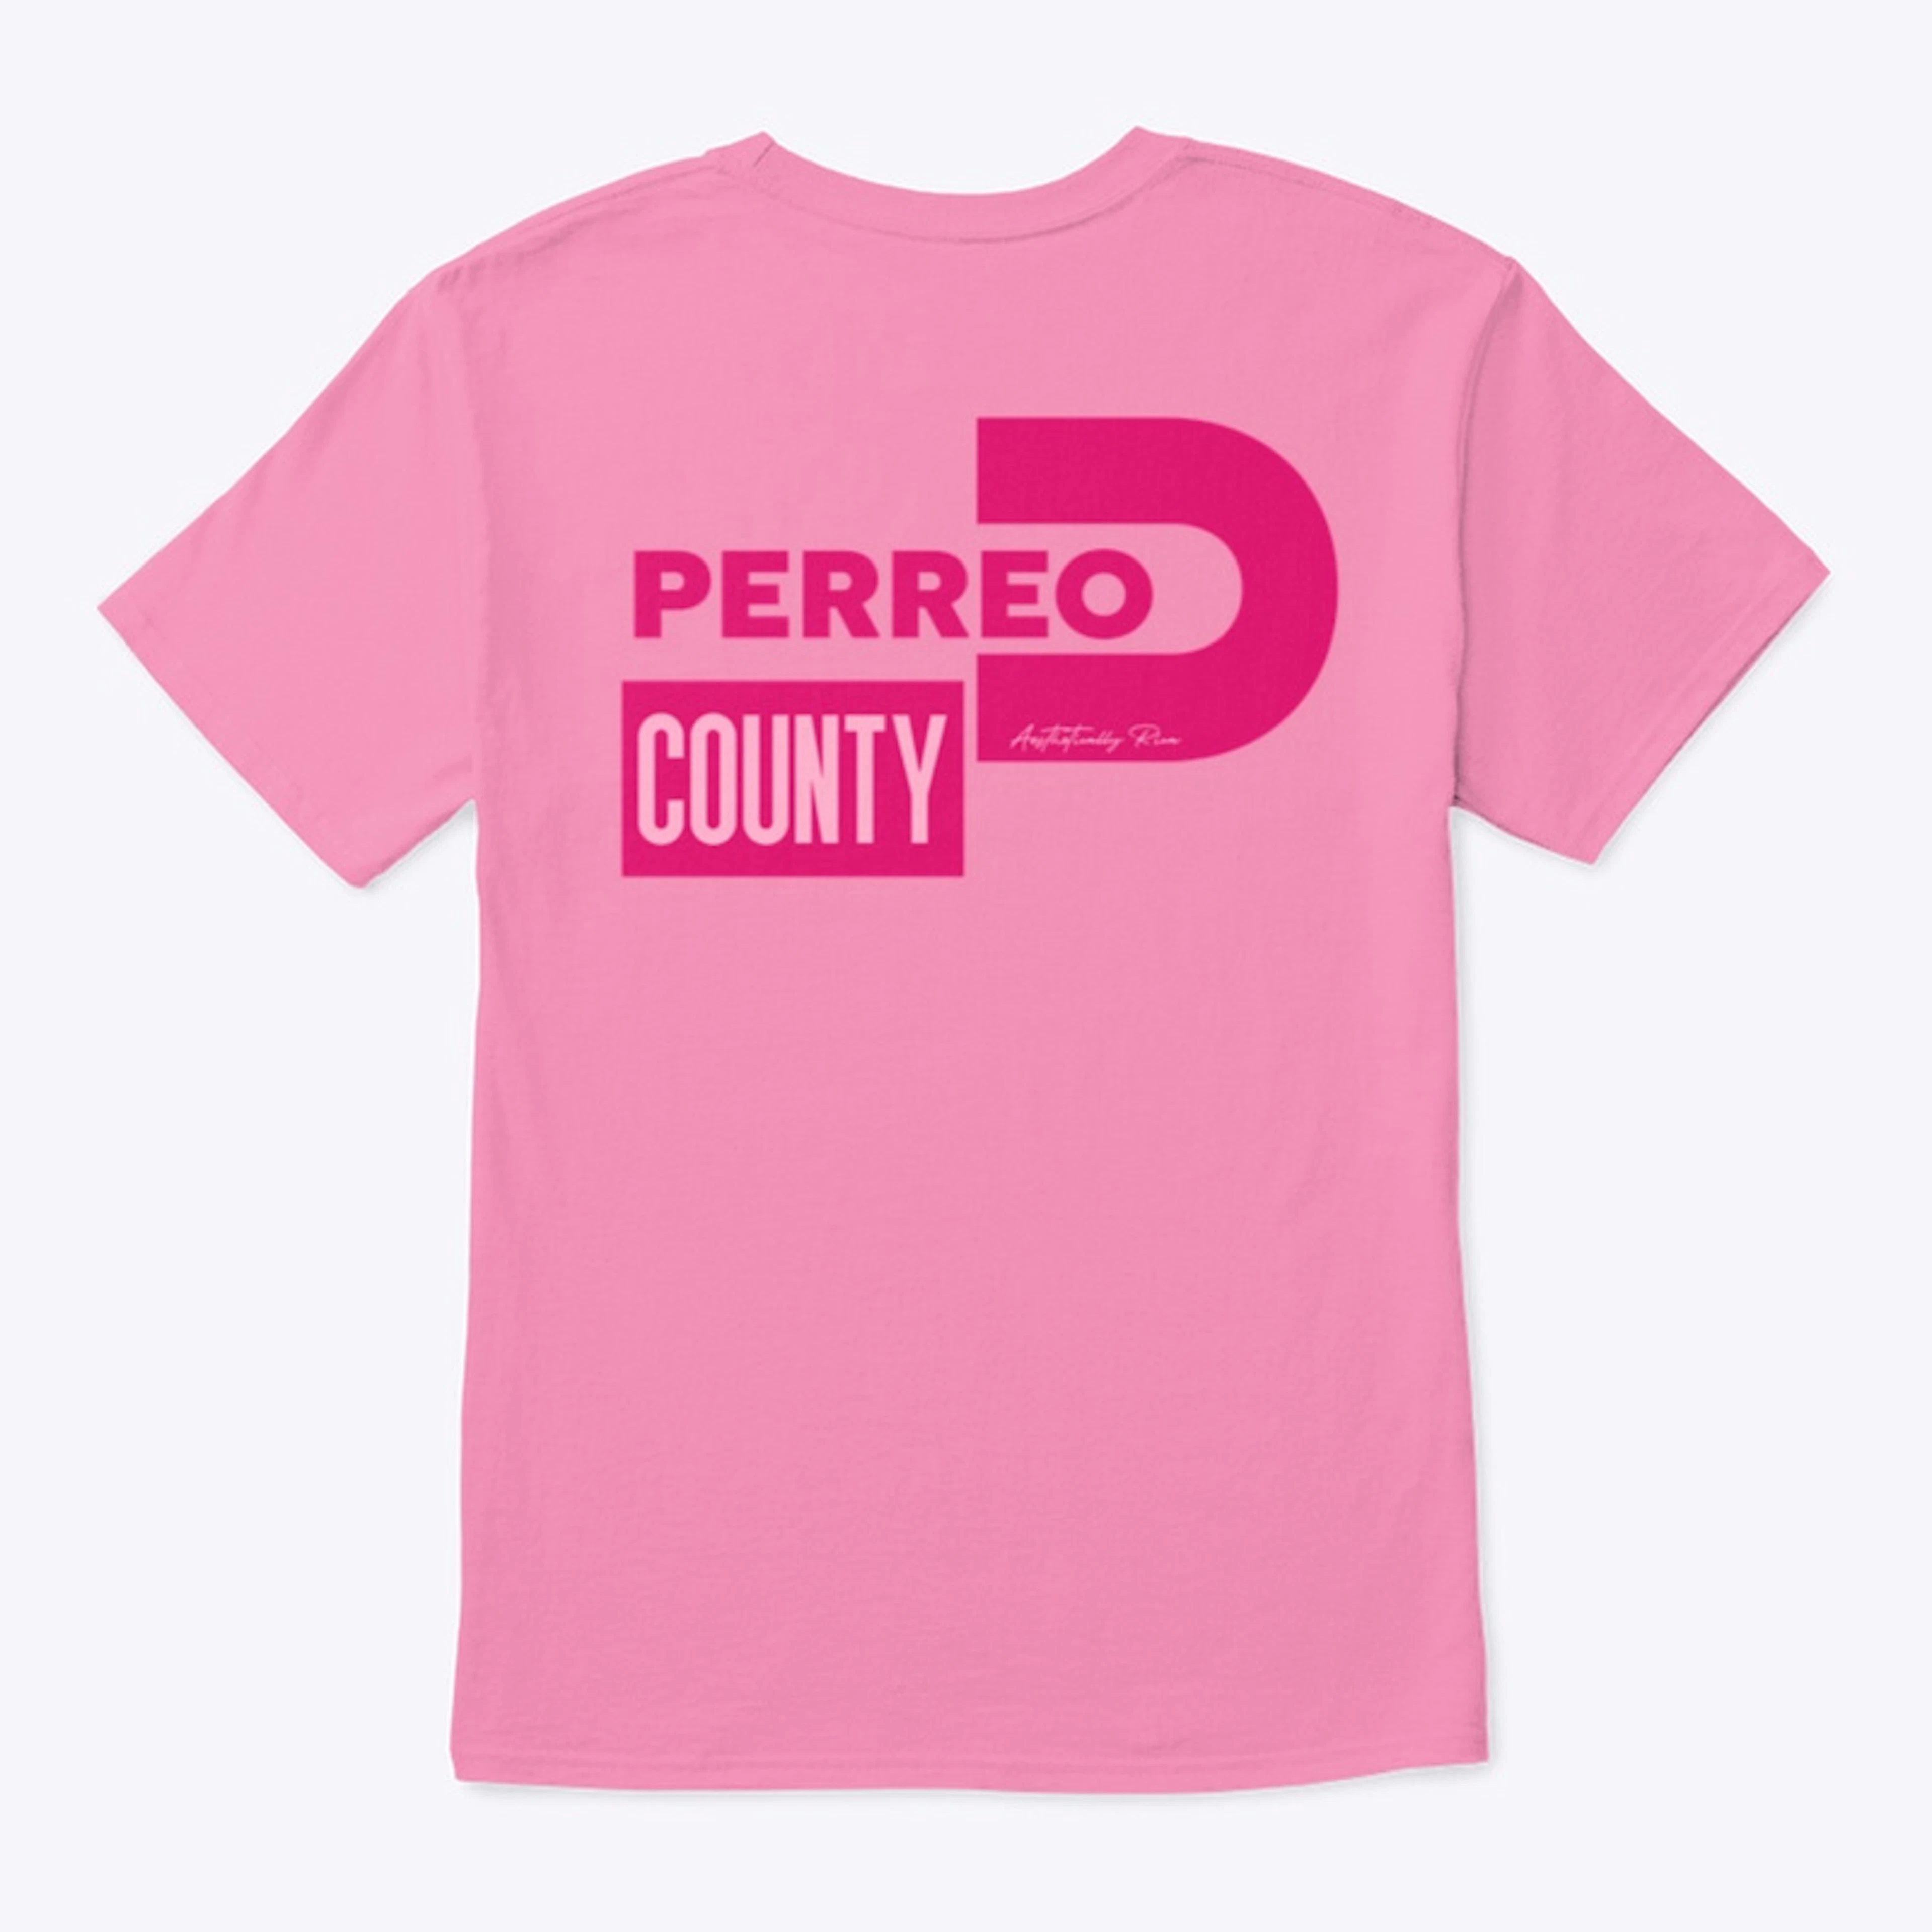 PERREO COUNTY (Pink)